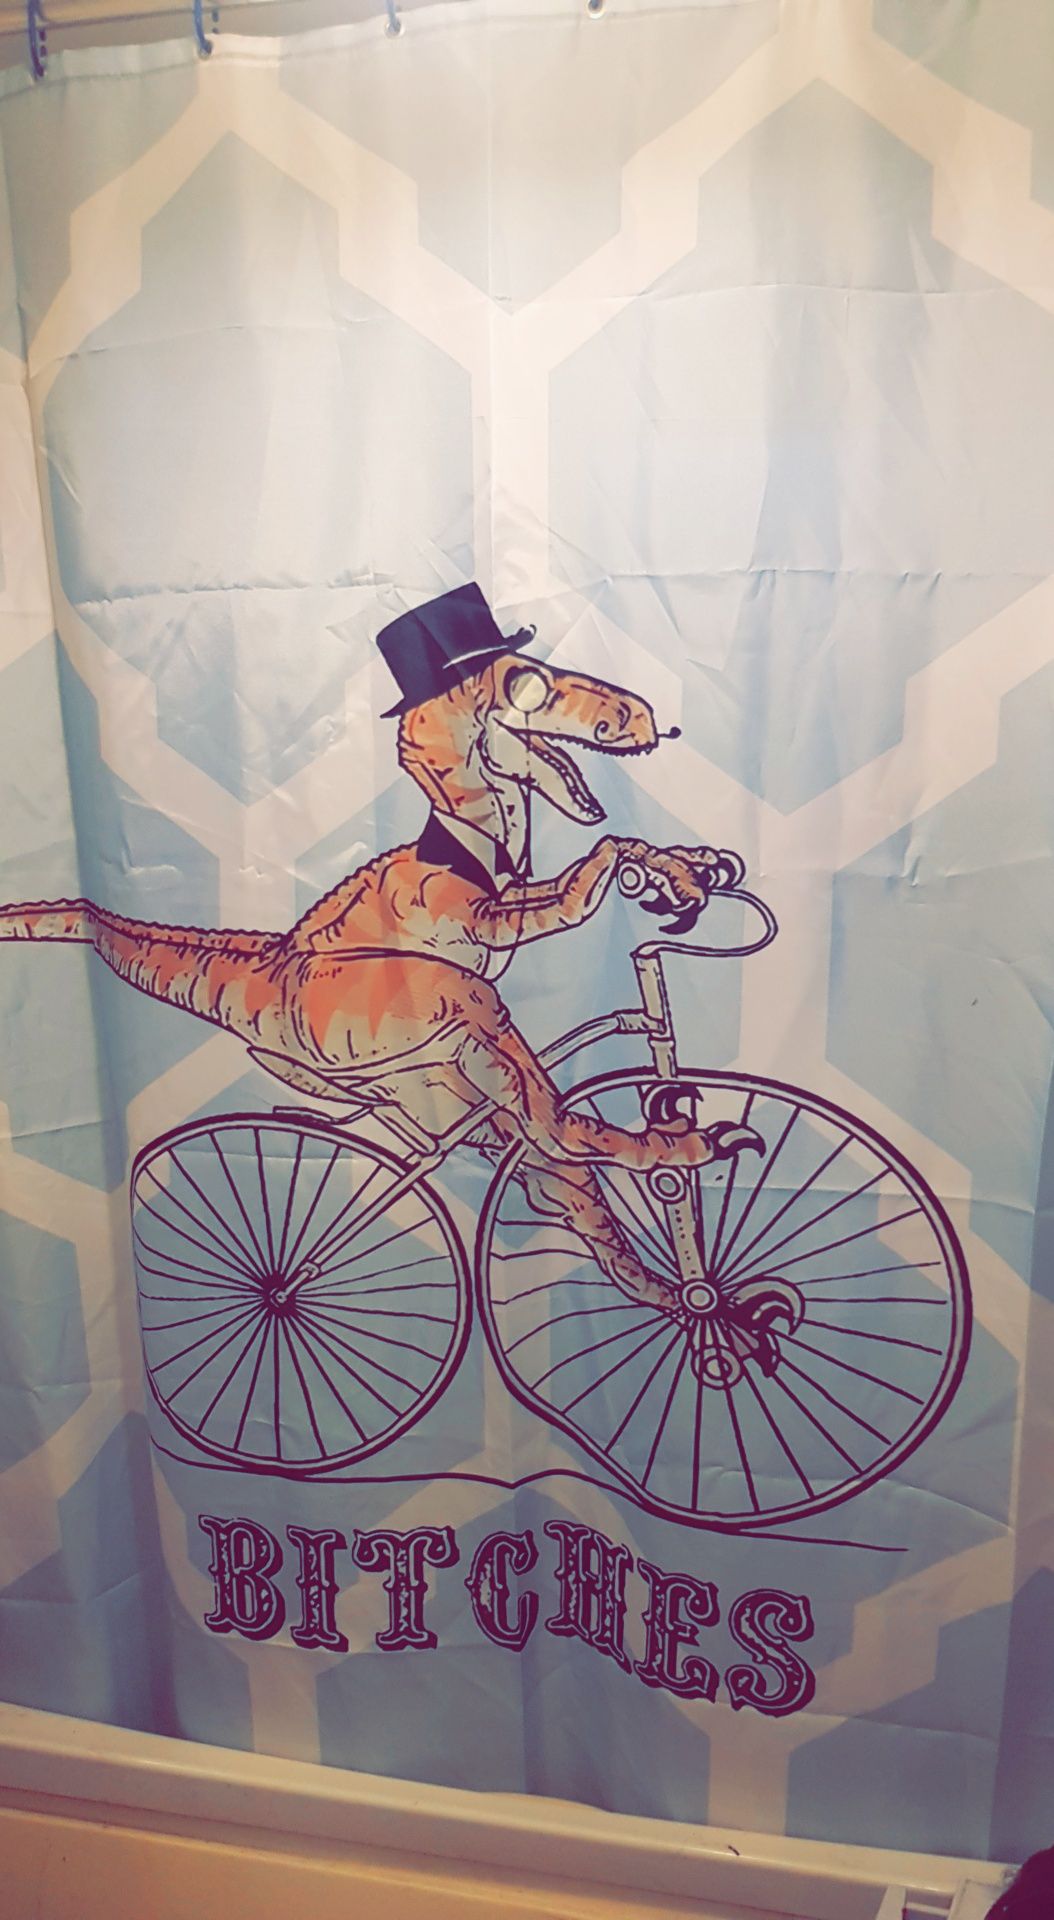 Told my husband to buy a new Shower Curtain. He did not disappoint.